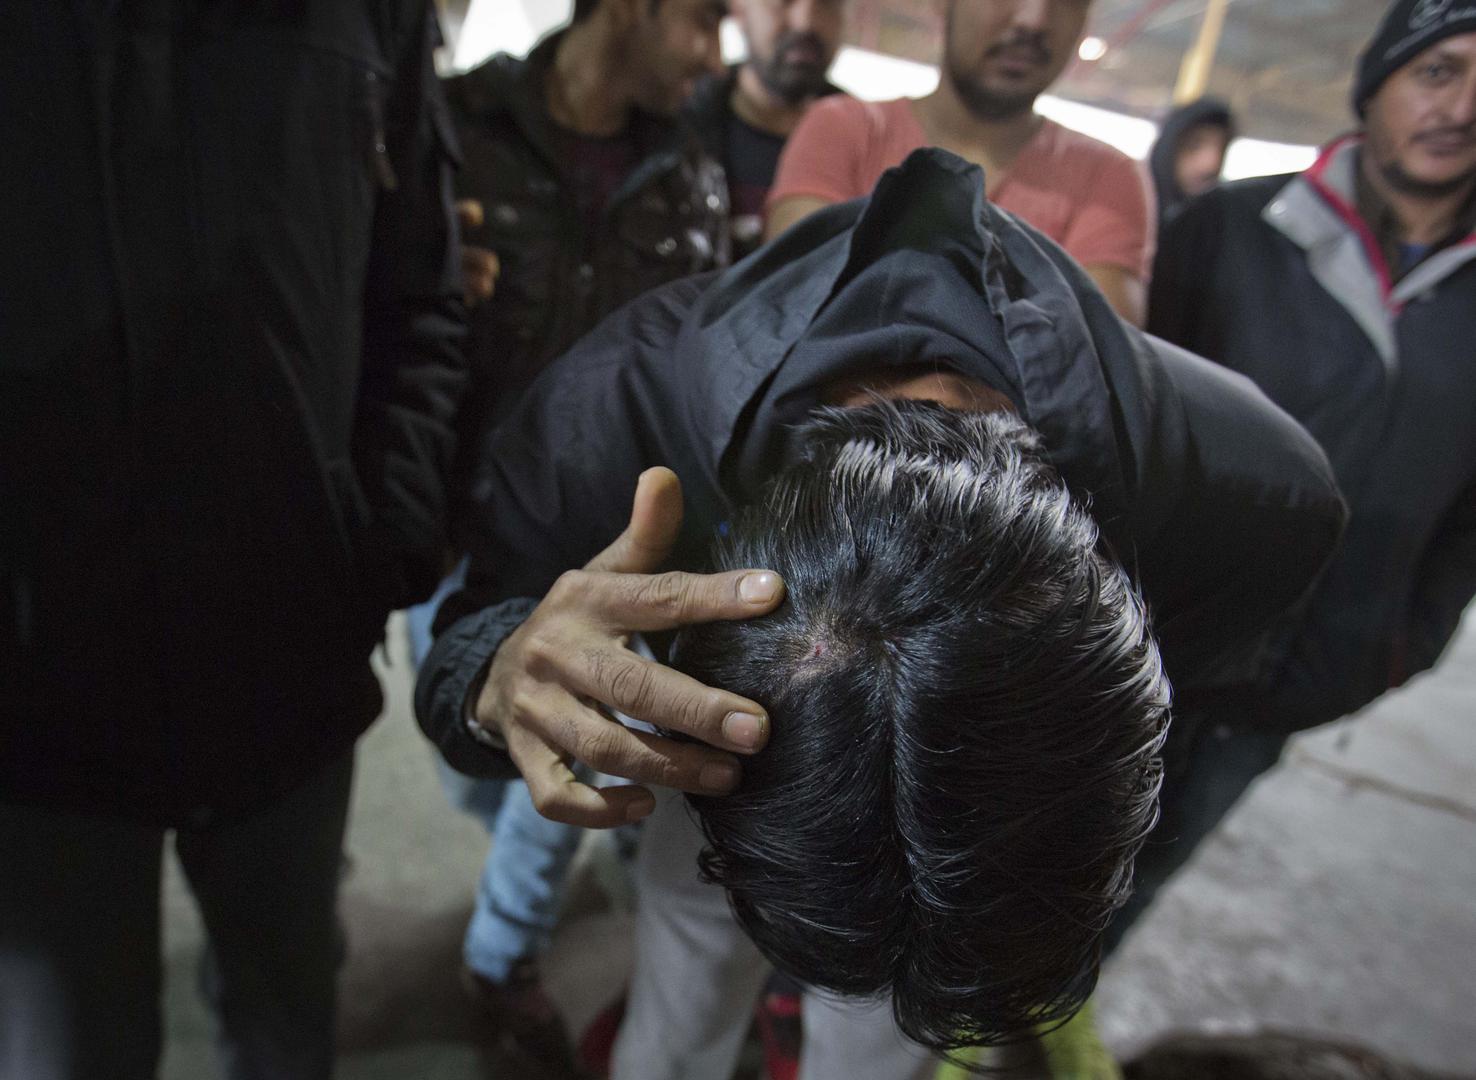 A migrant who claims he was beaten by Croatian police while attempting to cross the border to Croatia shows his injury at a factory hall turned migrants facility in Bihac, Bosnia-Herzegovina, Wednesday, March 13, 2019.